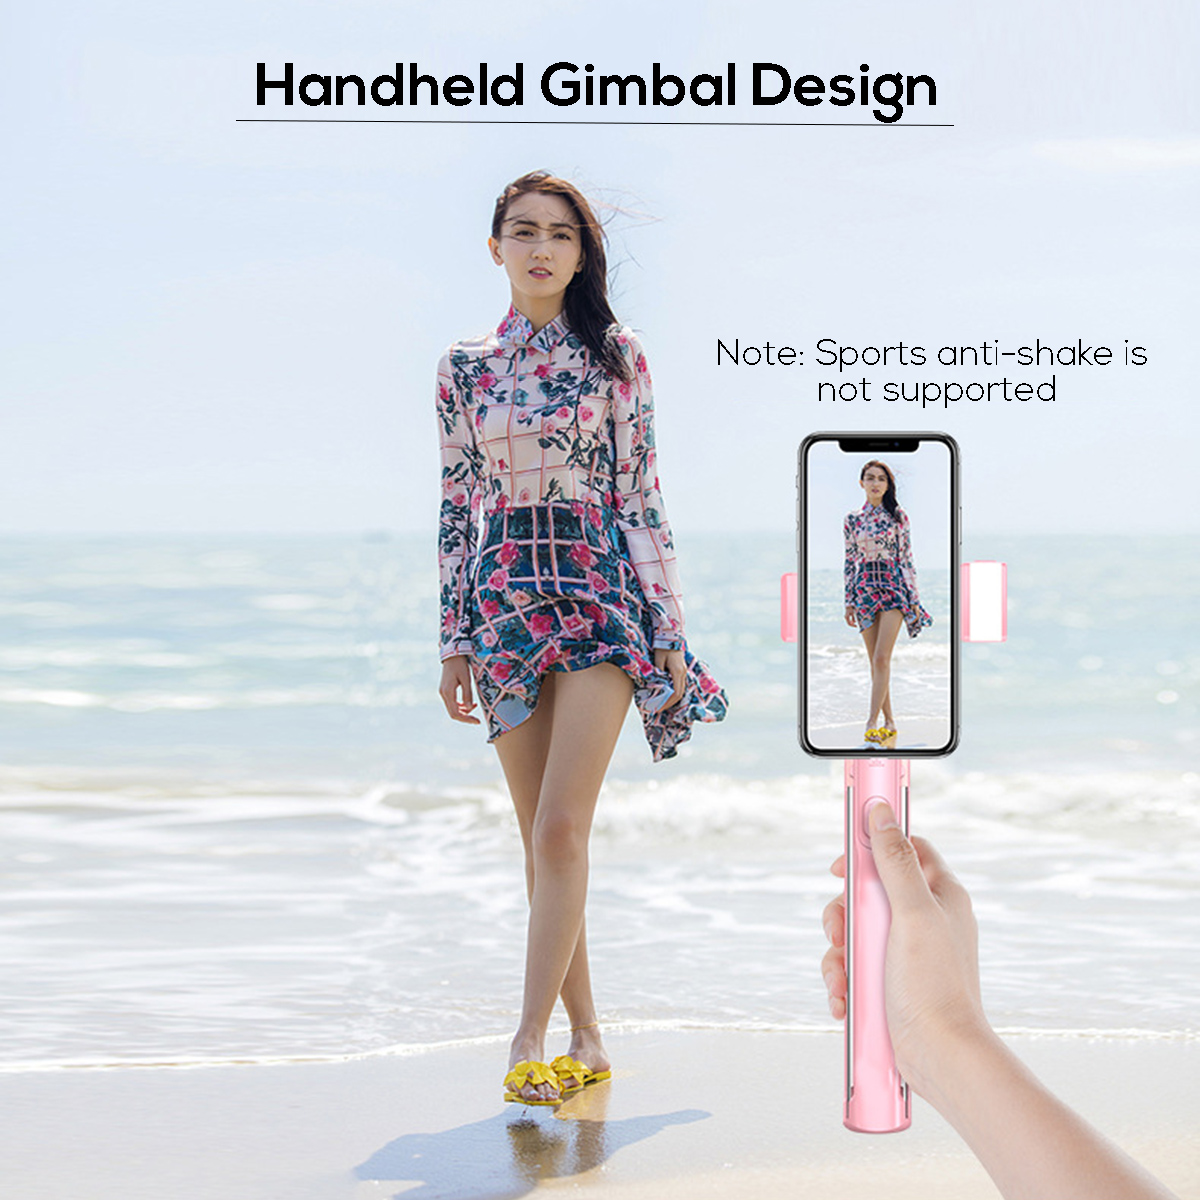 A19-110cm-3-in-1-bluetooth-Remote-Extendable-Multi-angle-Rotation-Tripod-Selfie-Stick-With-Fill-Ligh-1415347